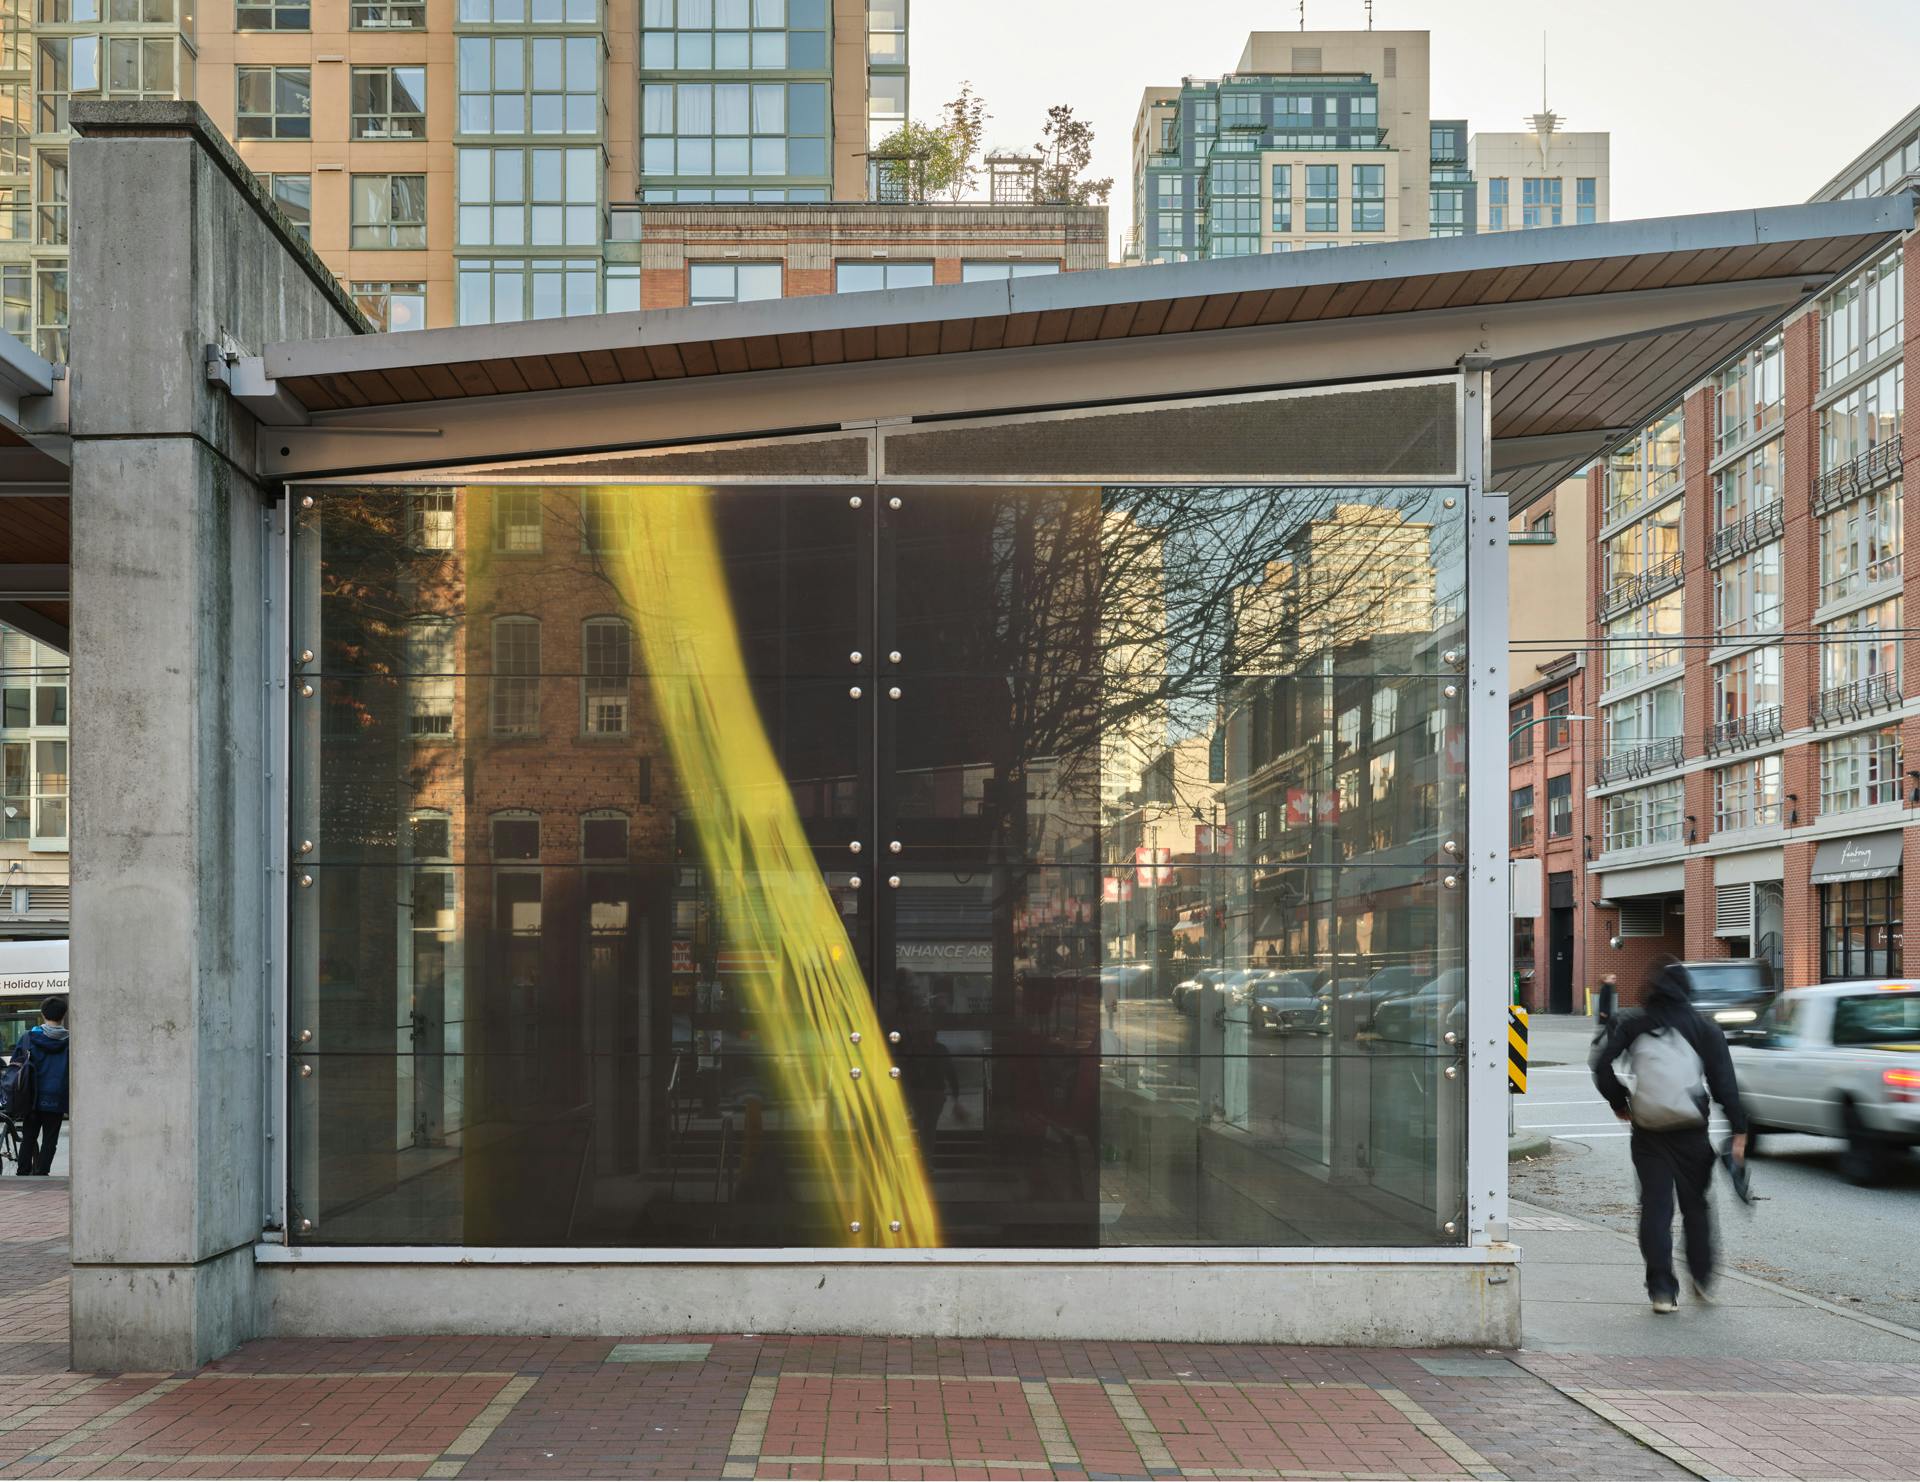 A frontal view of a SkyTrain station with one photogram in its window. The photogram depicts a yellow nylon produce bag against dark photographic paper.